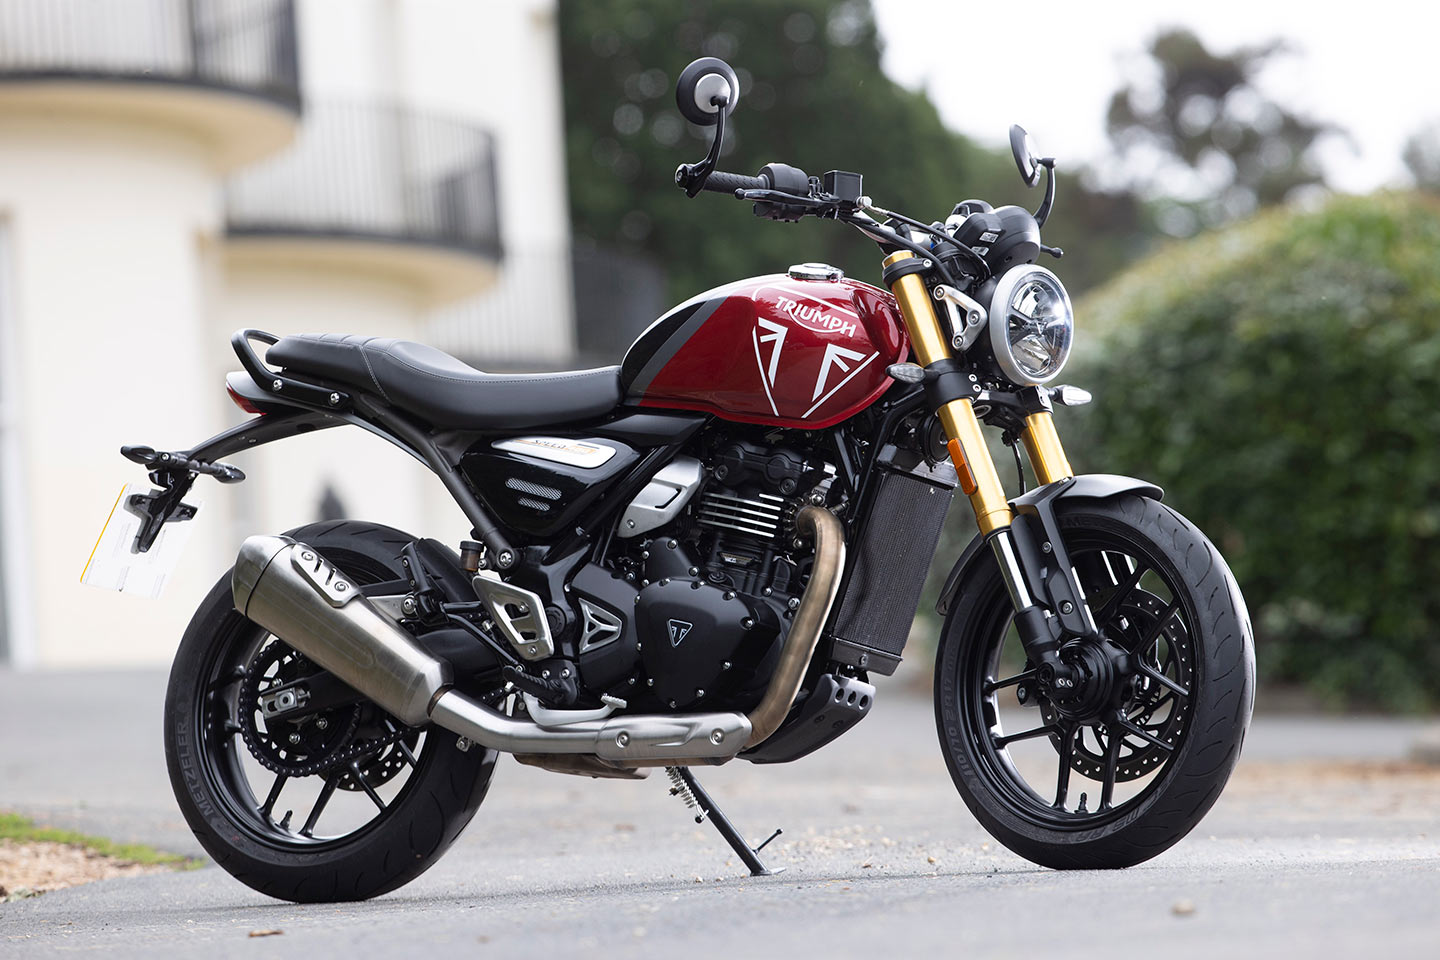 Triumph’s all-new entry-level single-cylinder Speed 400 opens up the prestigious British brand to everyone.